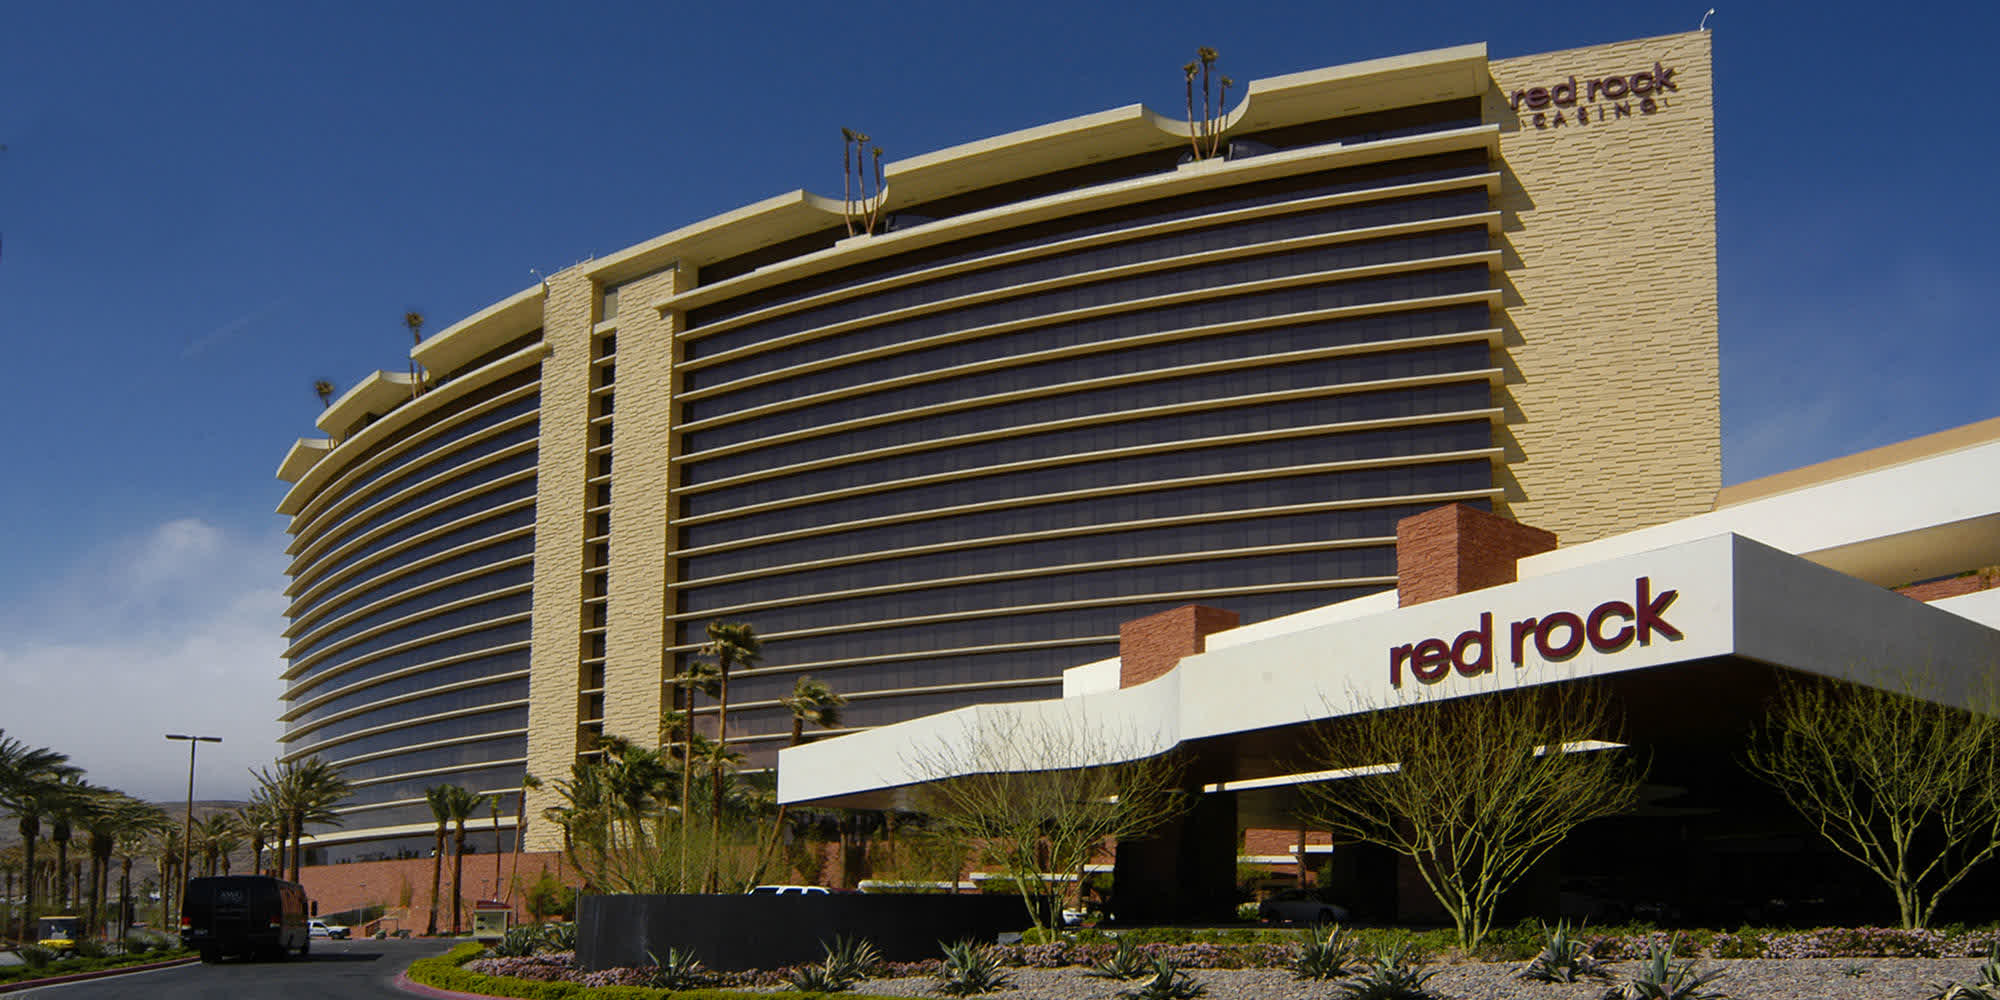 red rock casino and hotel vancovuer bc